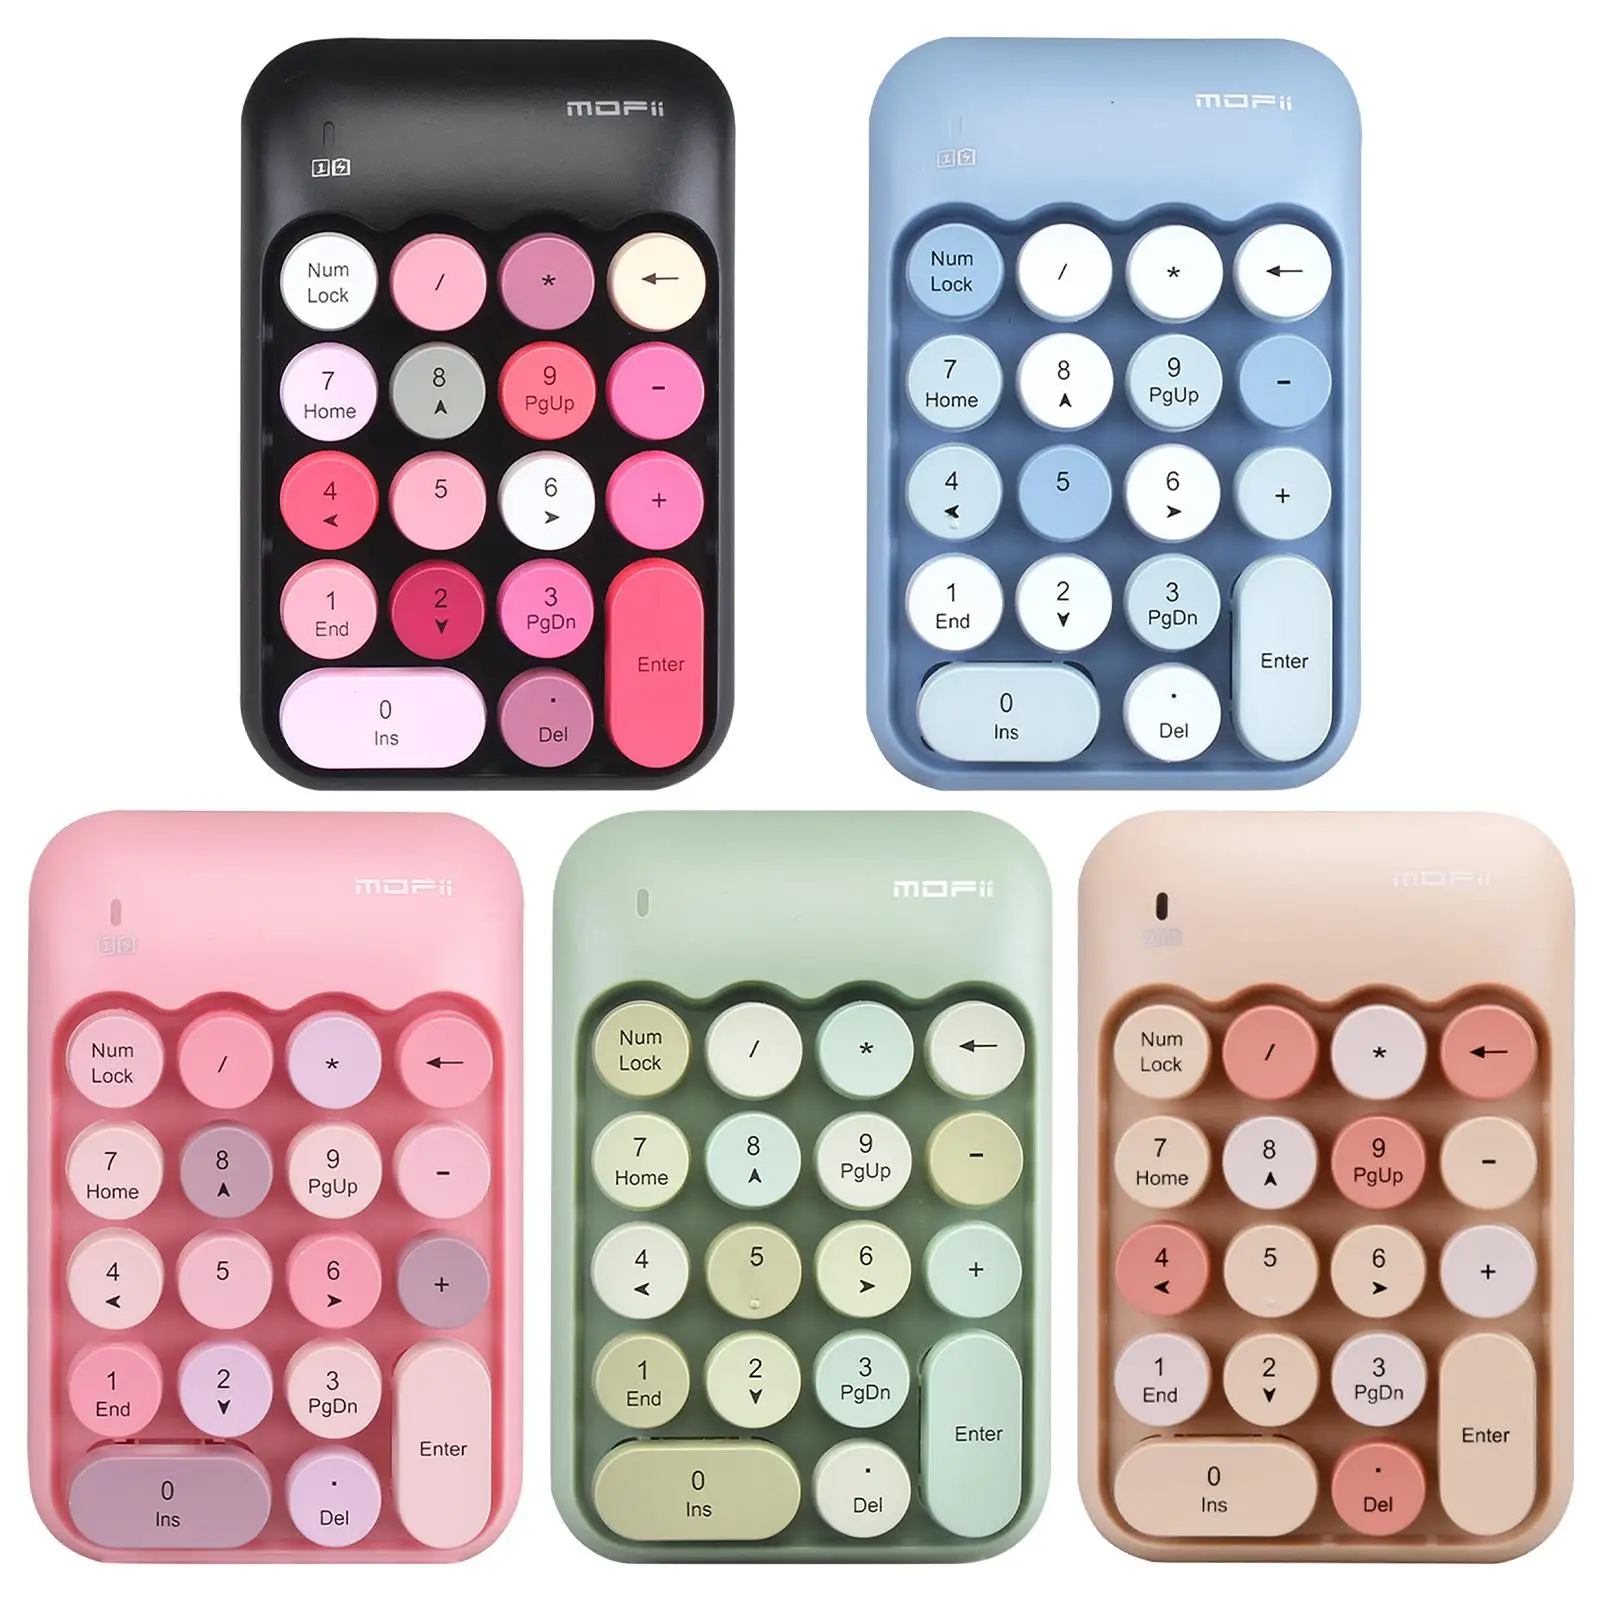 Wireless Numerical Keypad, 18 Keys 2.4 GHz USB Number Pad Financial Accounting Numeric Keypad for Laptop PC Notebook Desktop